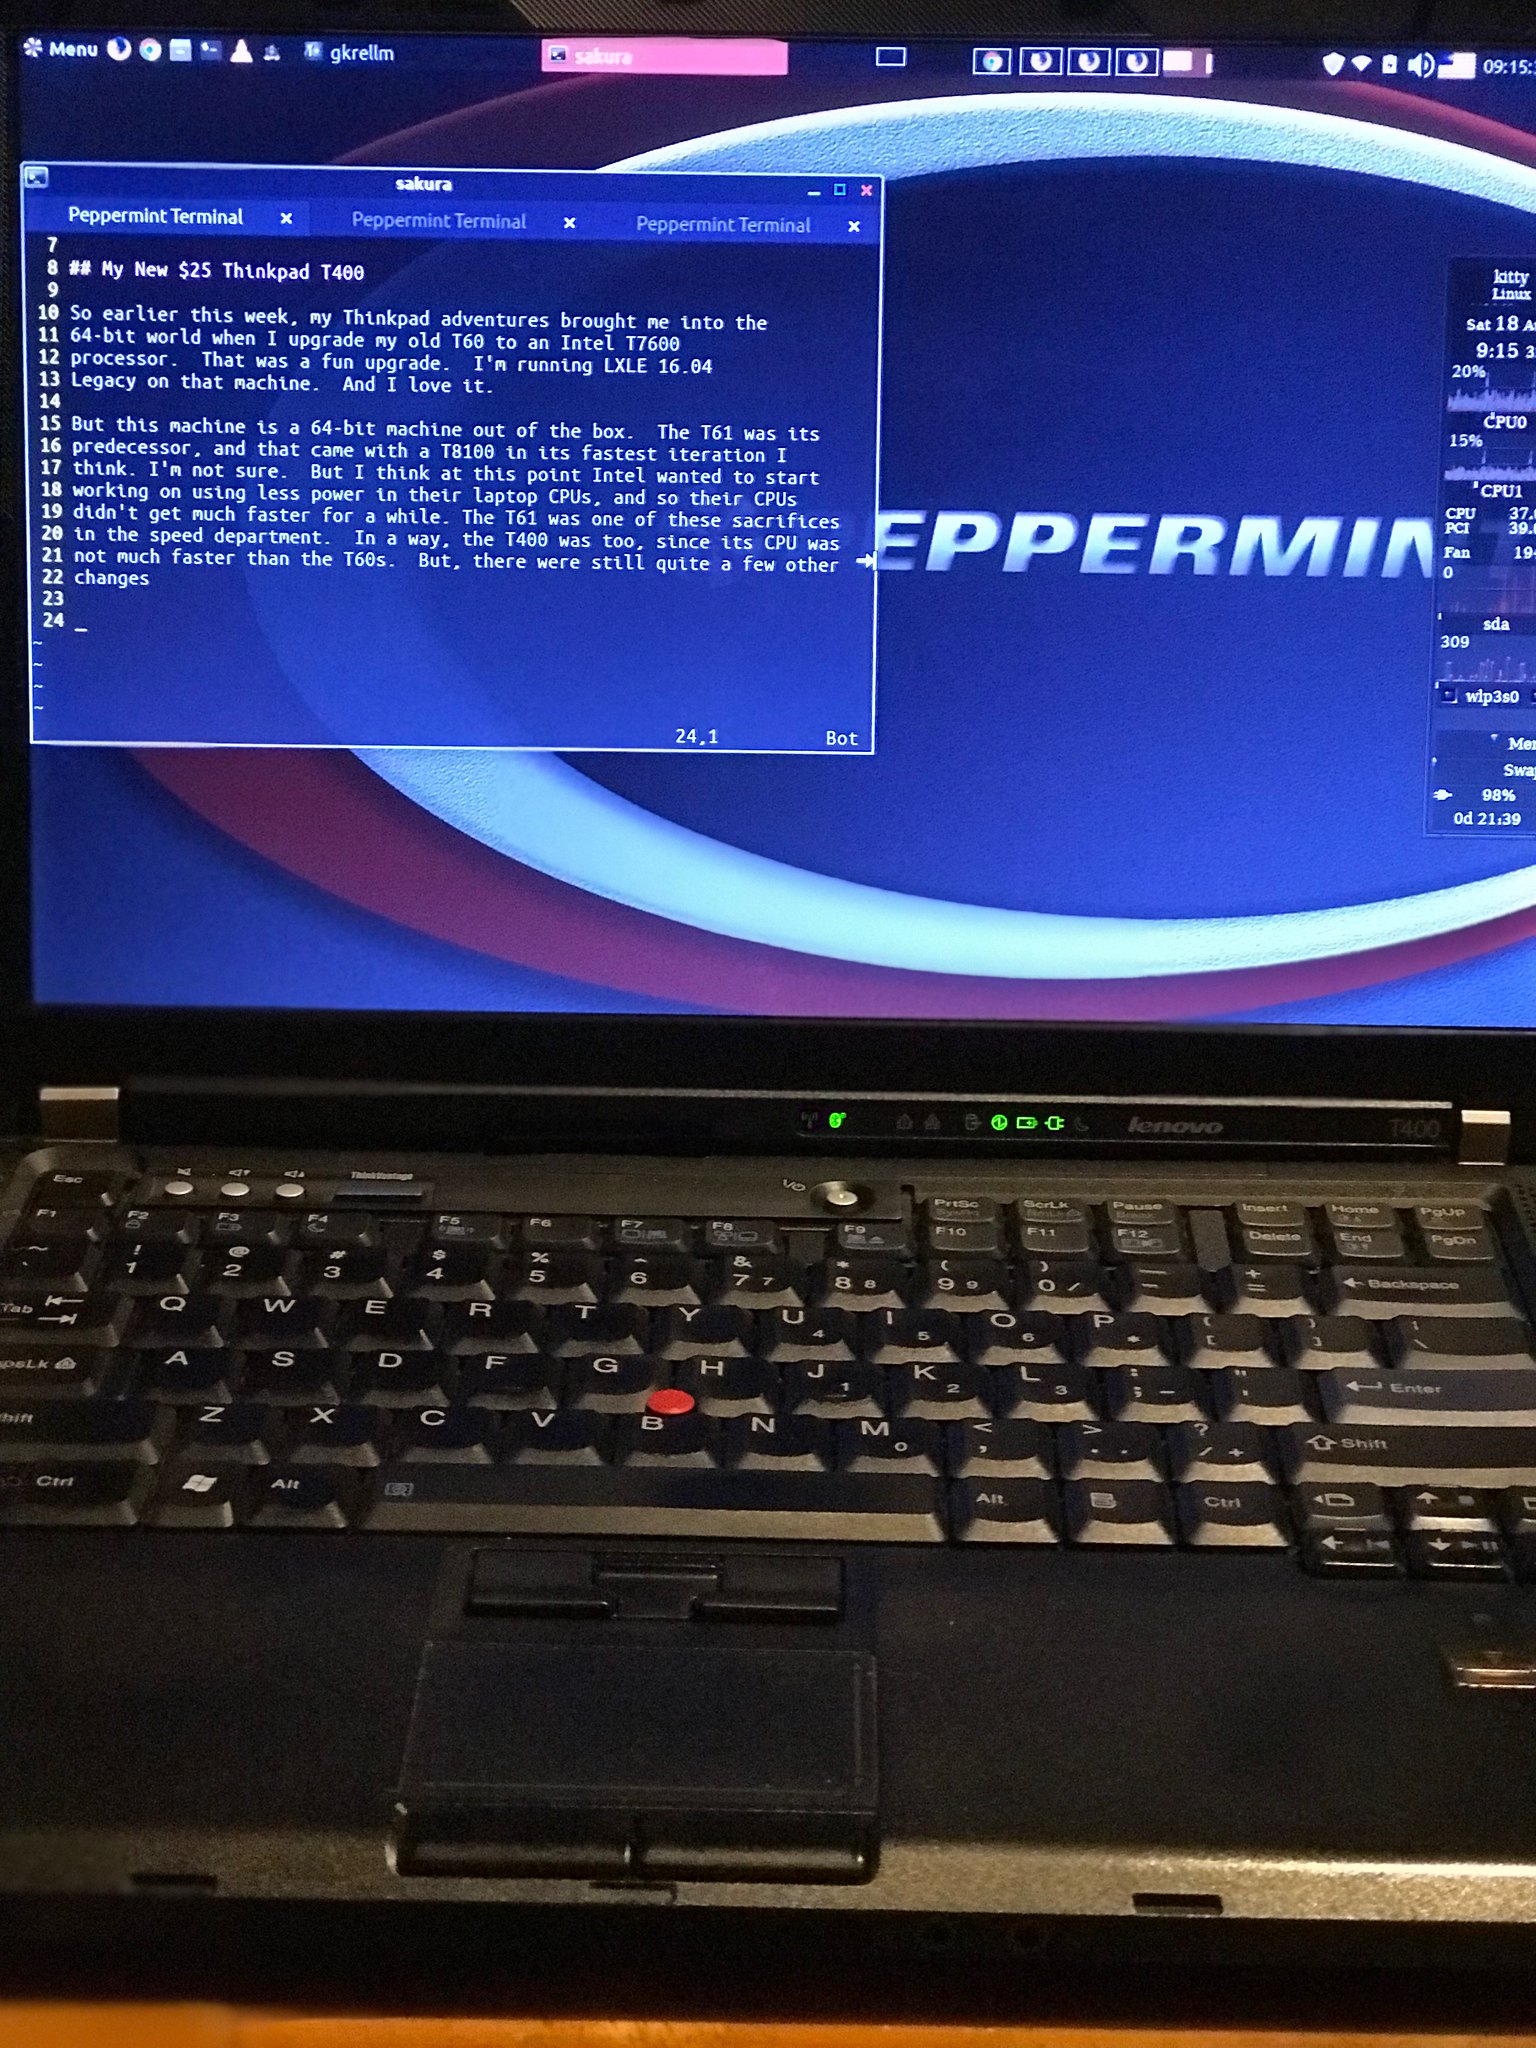 Thinkpad T400 with Peppermint 9